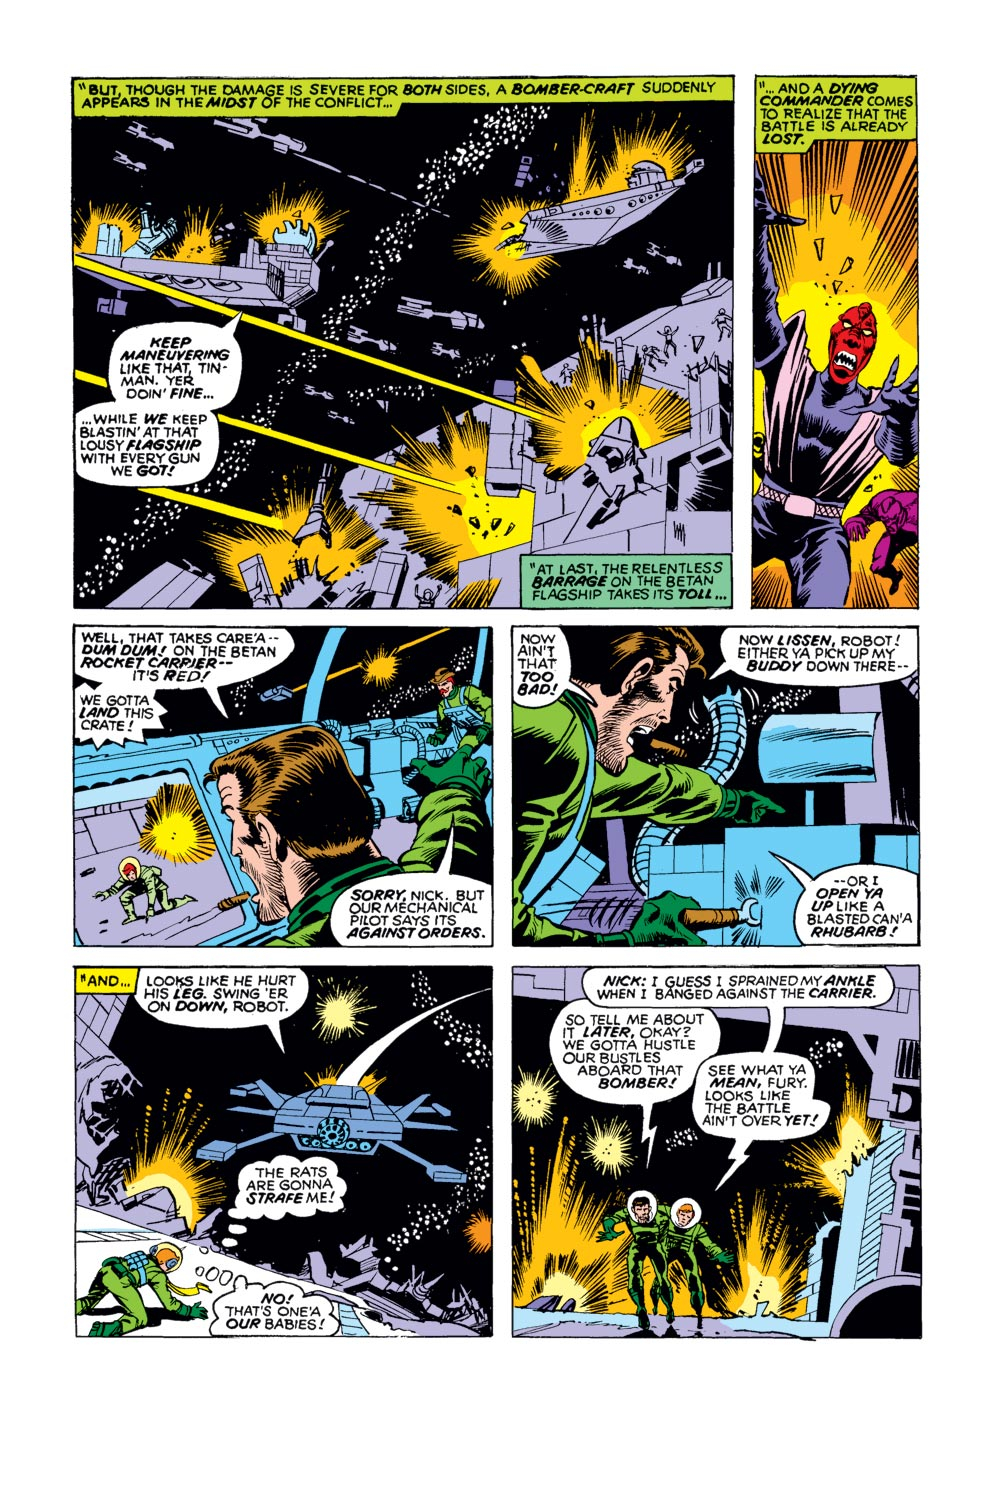 What If? (1977) issue 14 - Sgt. Fury had Fought WWII in Outer Space - Page 33